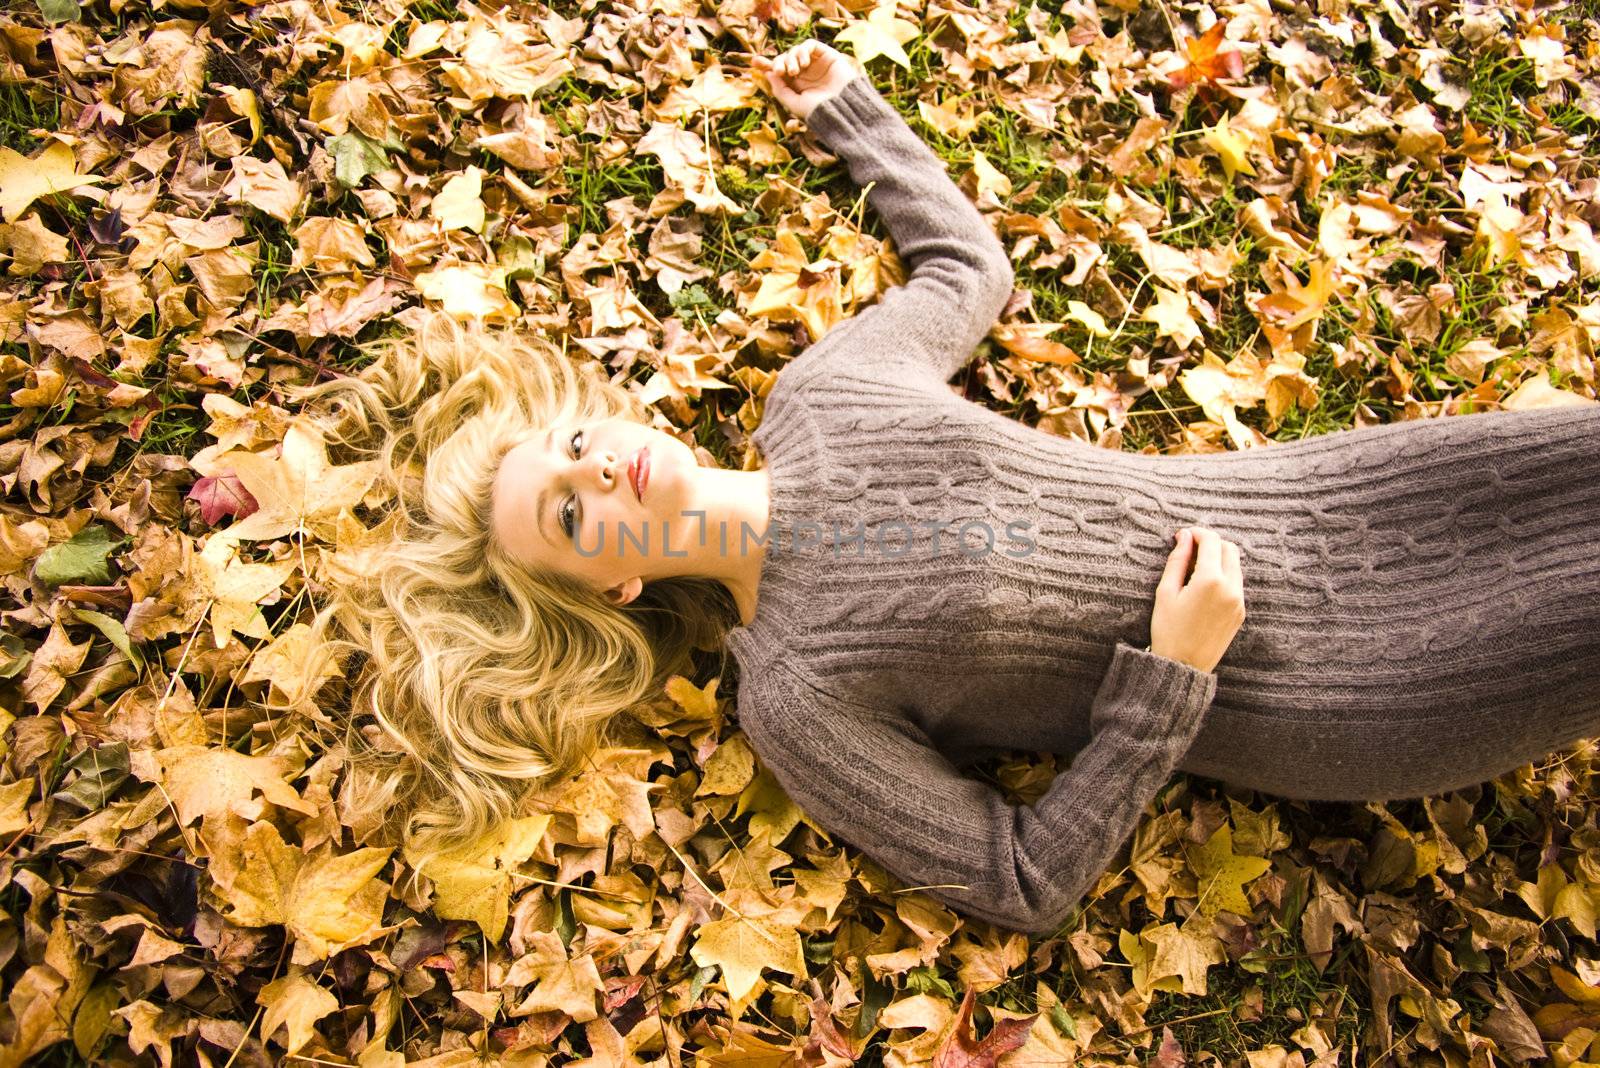 Girl in the Autumn leaves by angietakespics